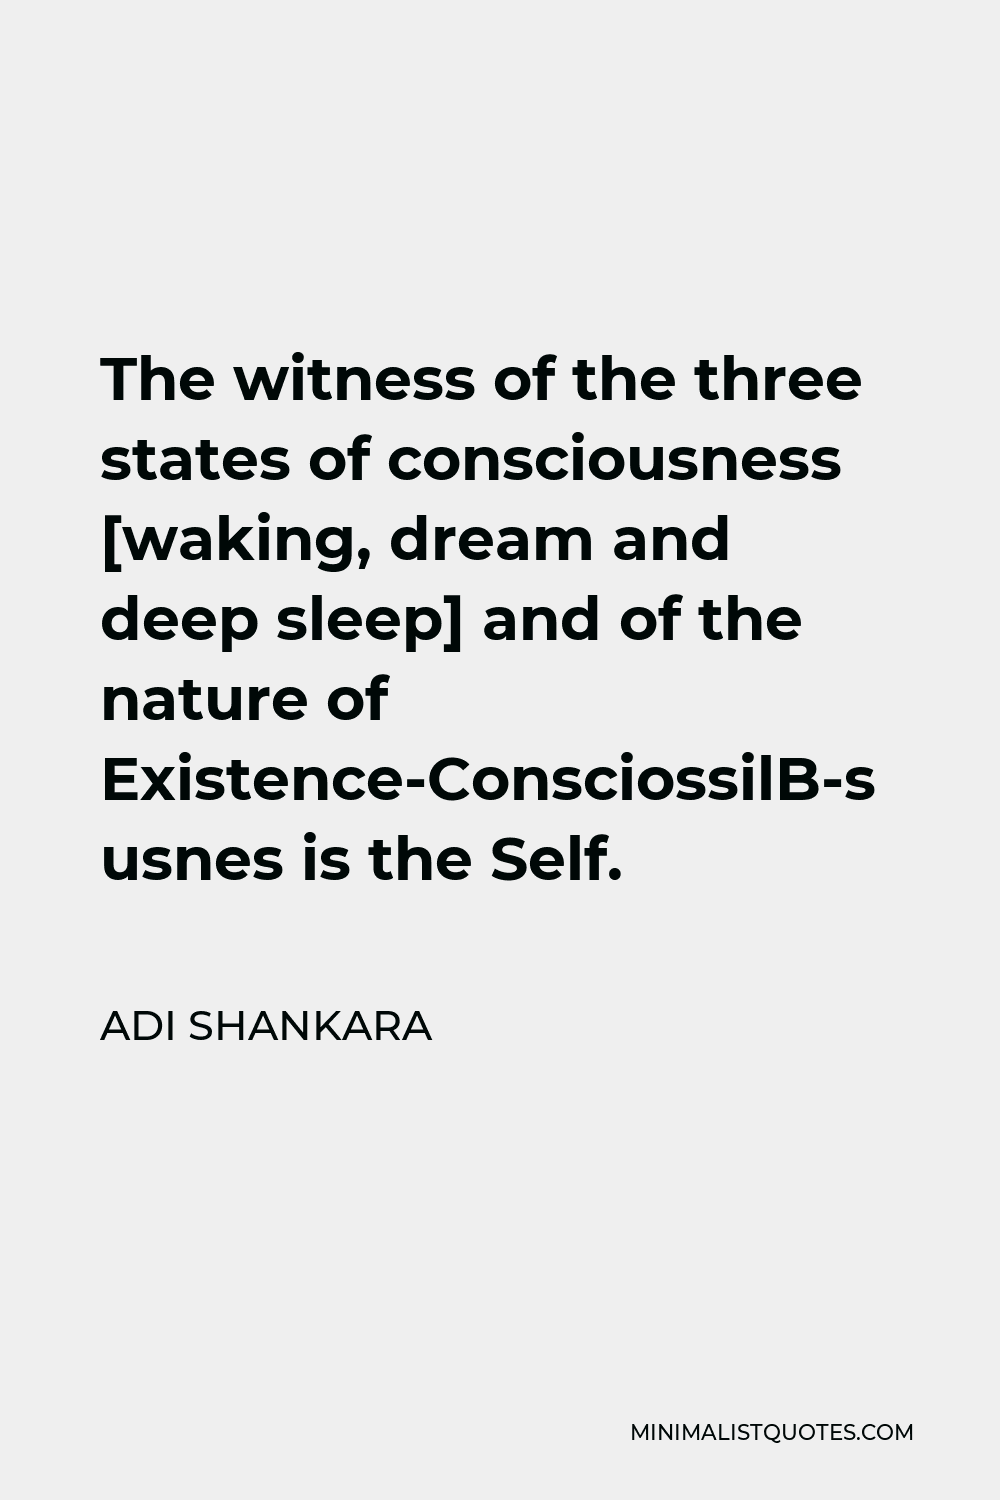 Adi Shankara Quote - The witness of the three states of consciousness [waking, dream and deep sleep] and of the nature of Existence-Consciousness-Bliss is the Self.